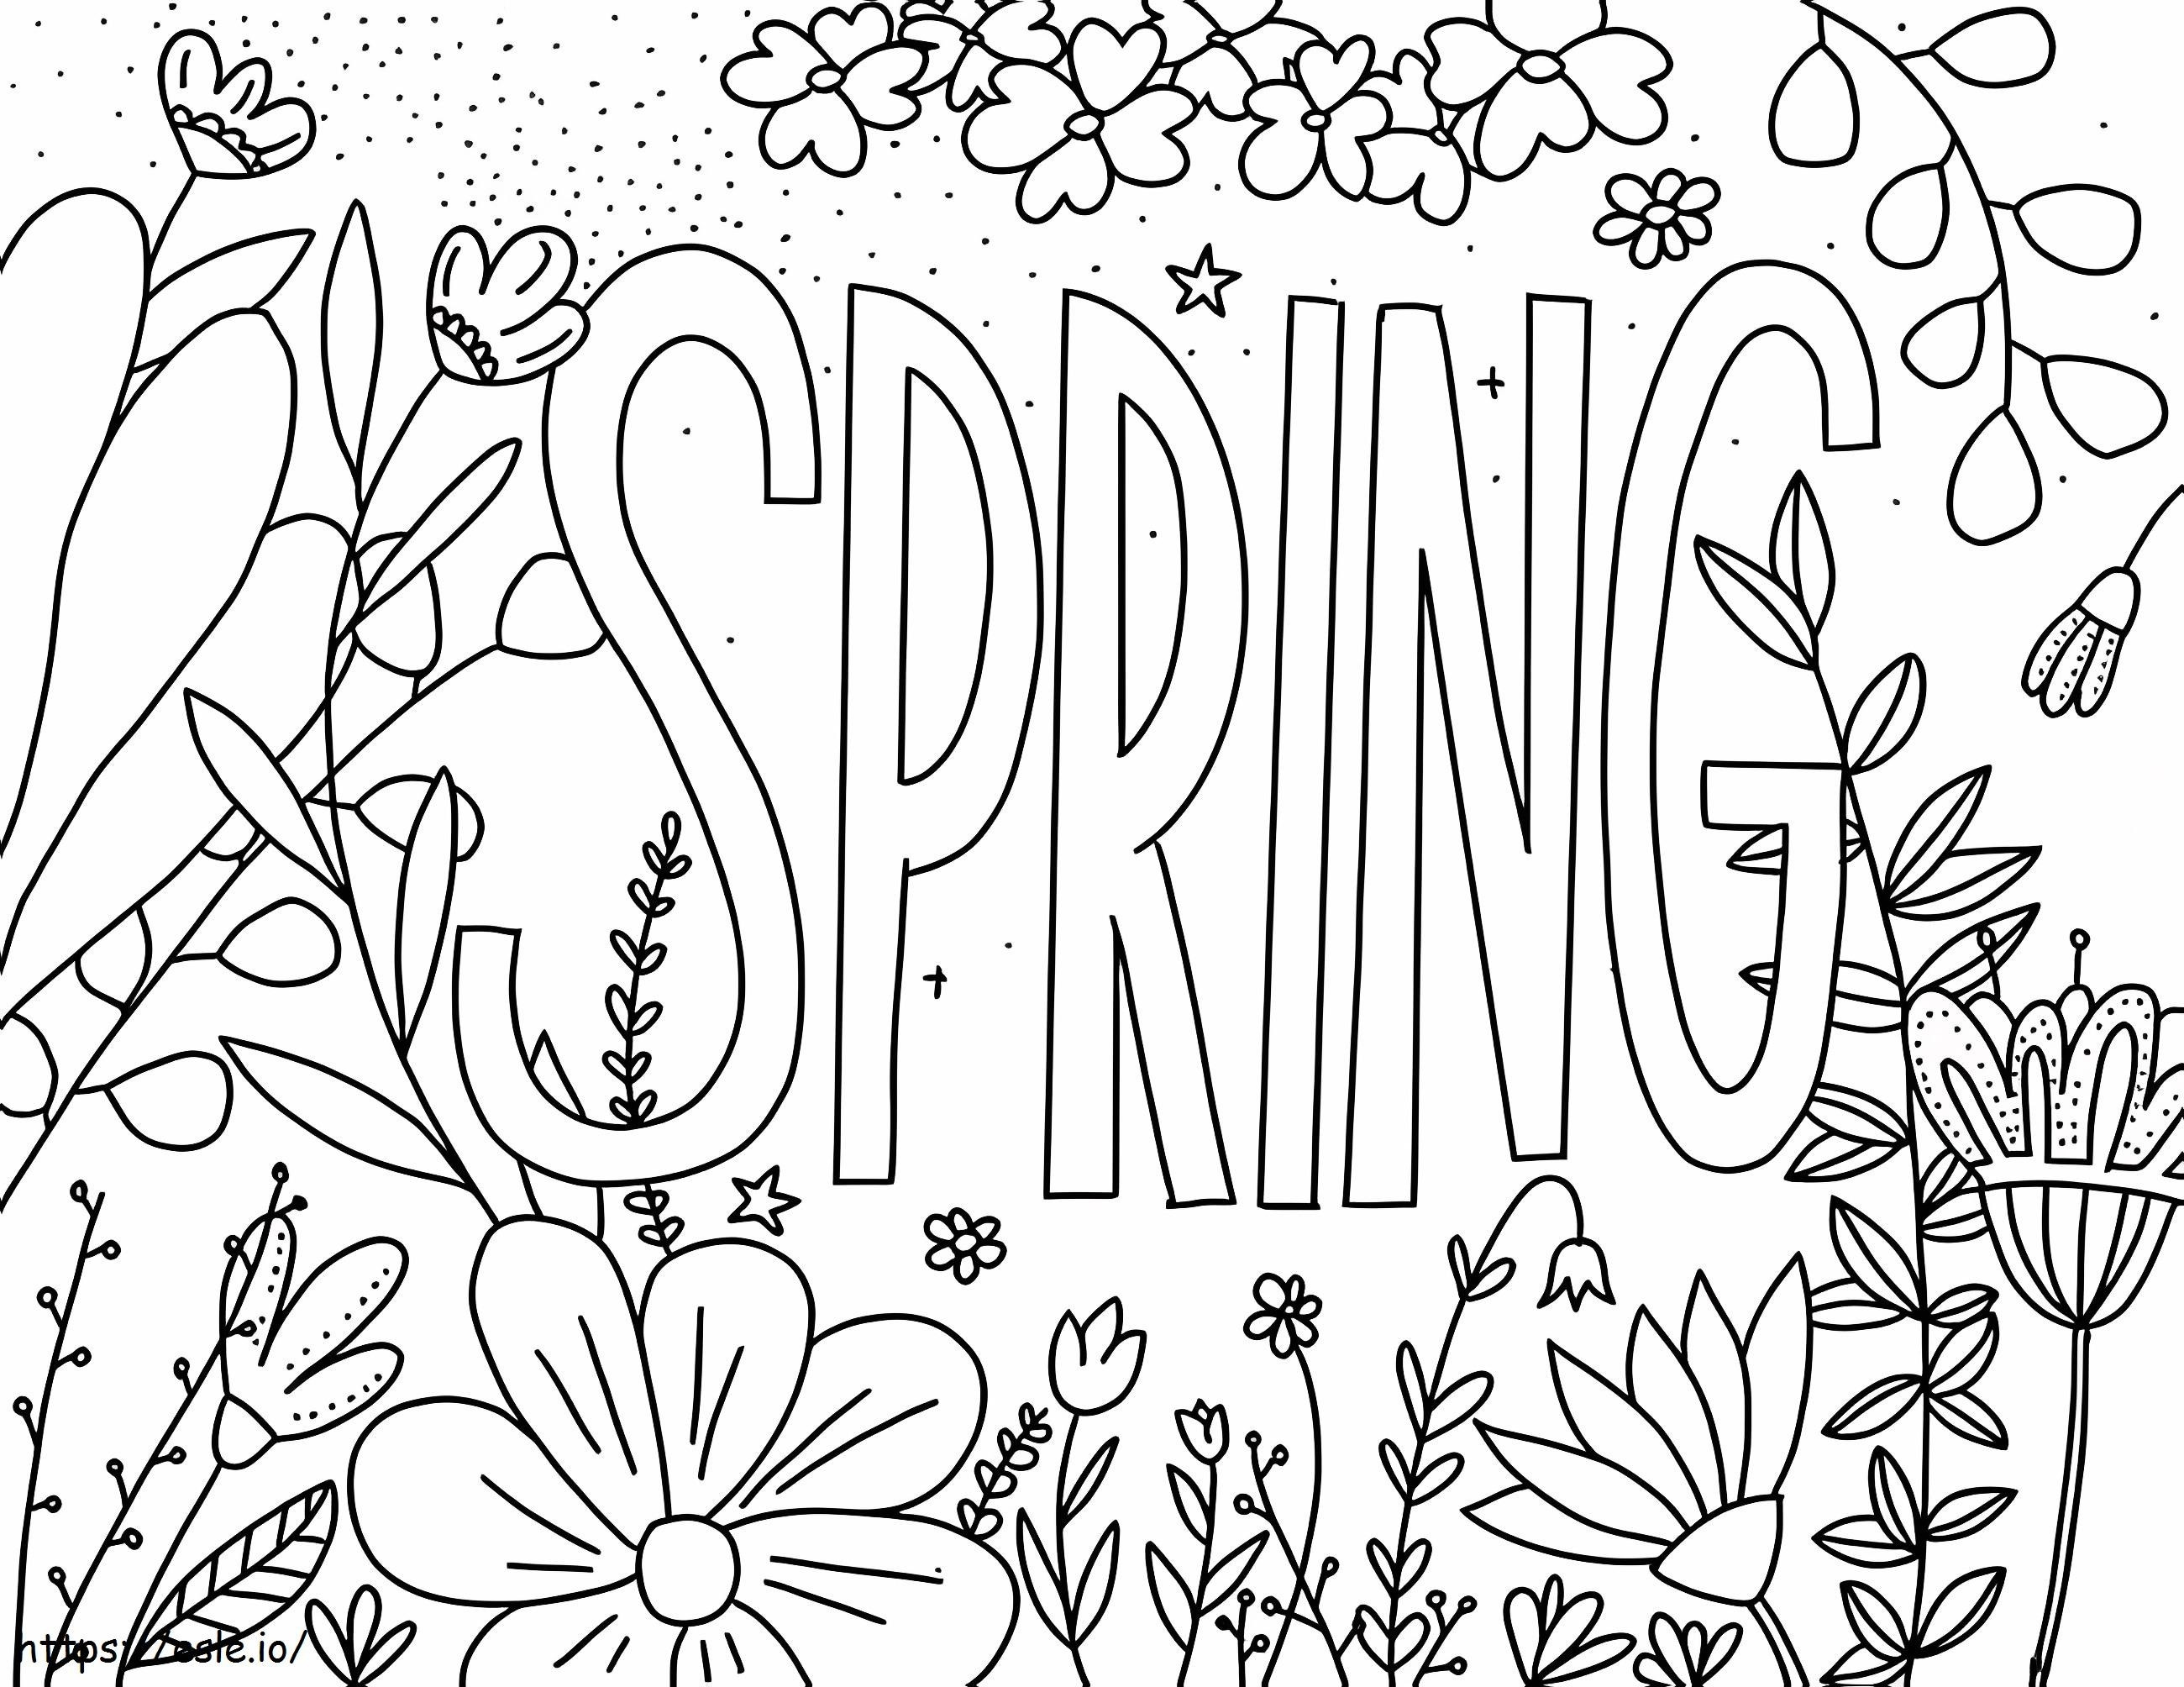 Simple Spring coloring page